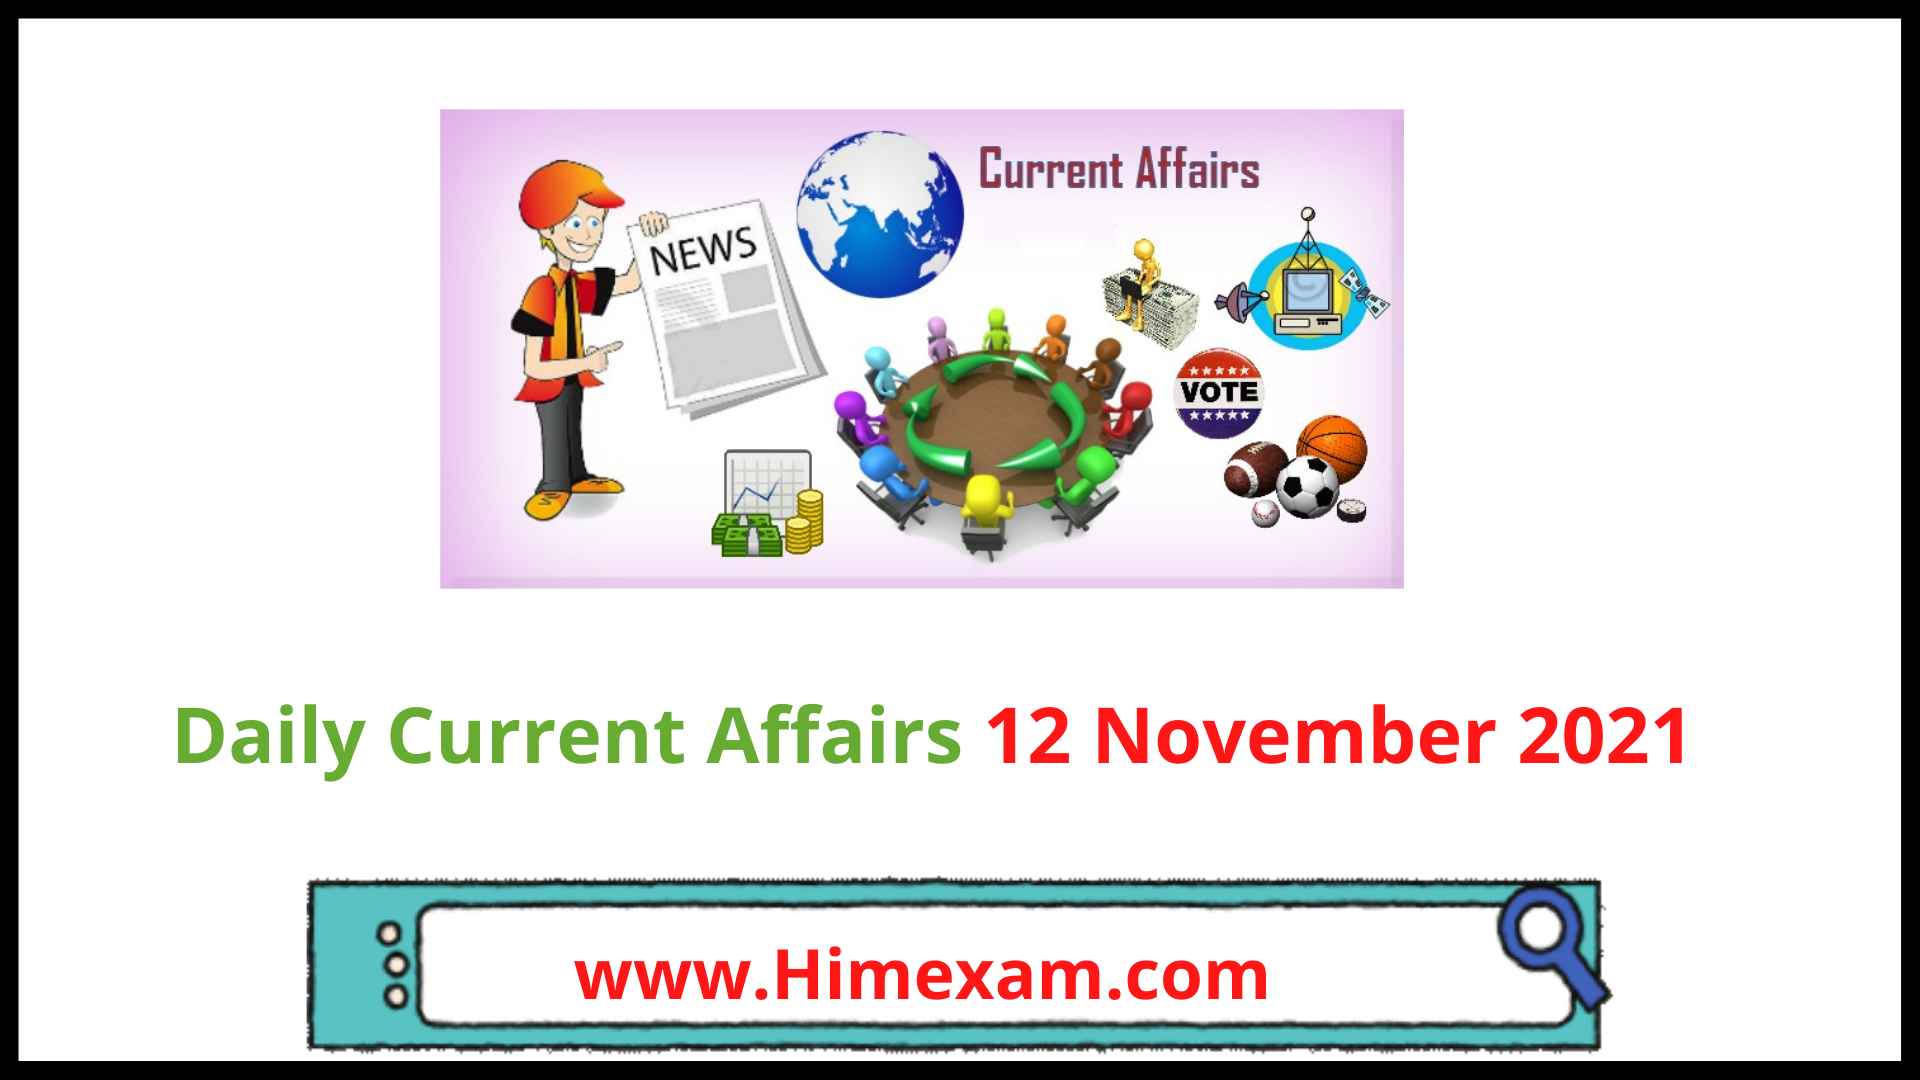 Daily Current Affairs 12 November 2021